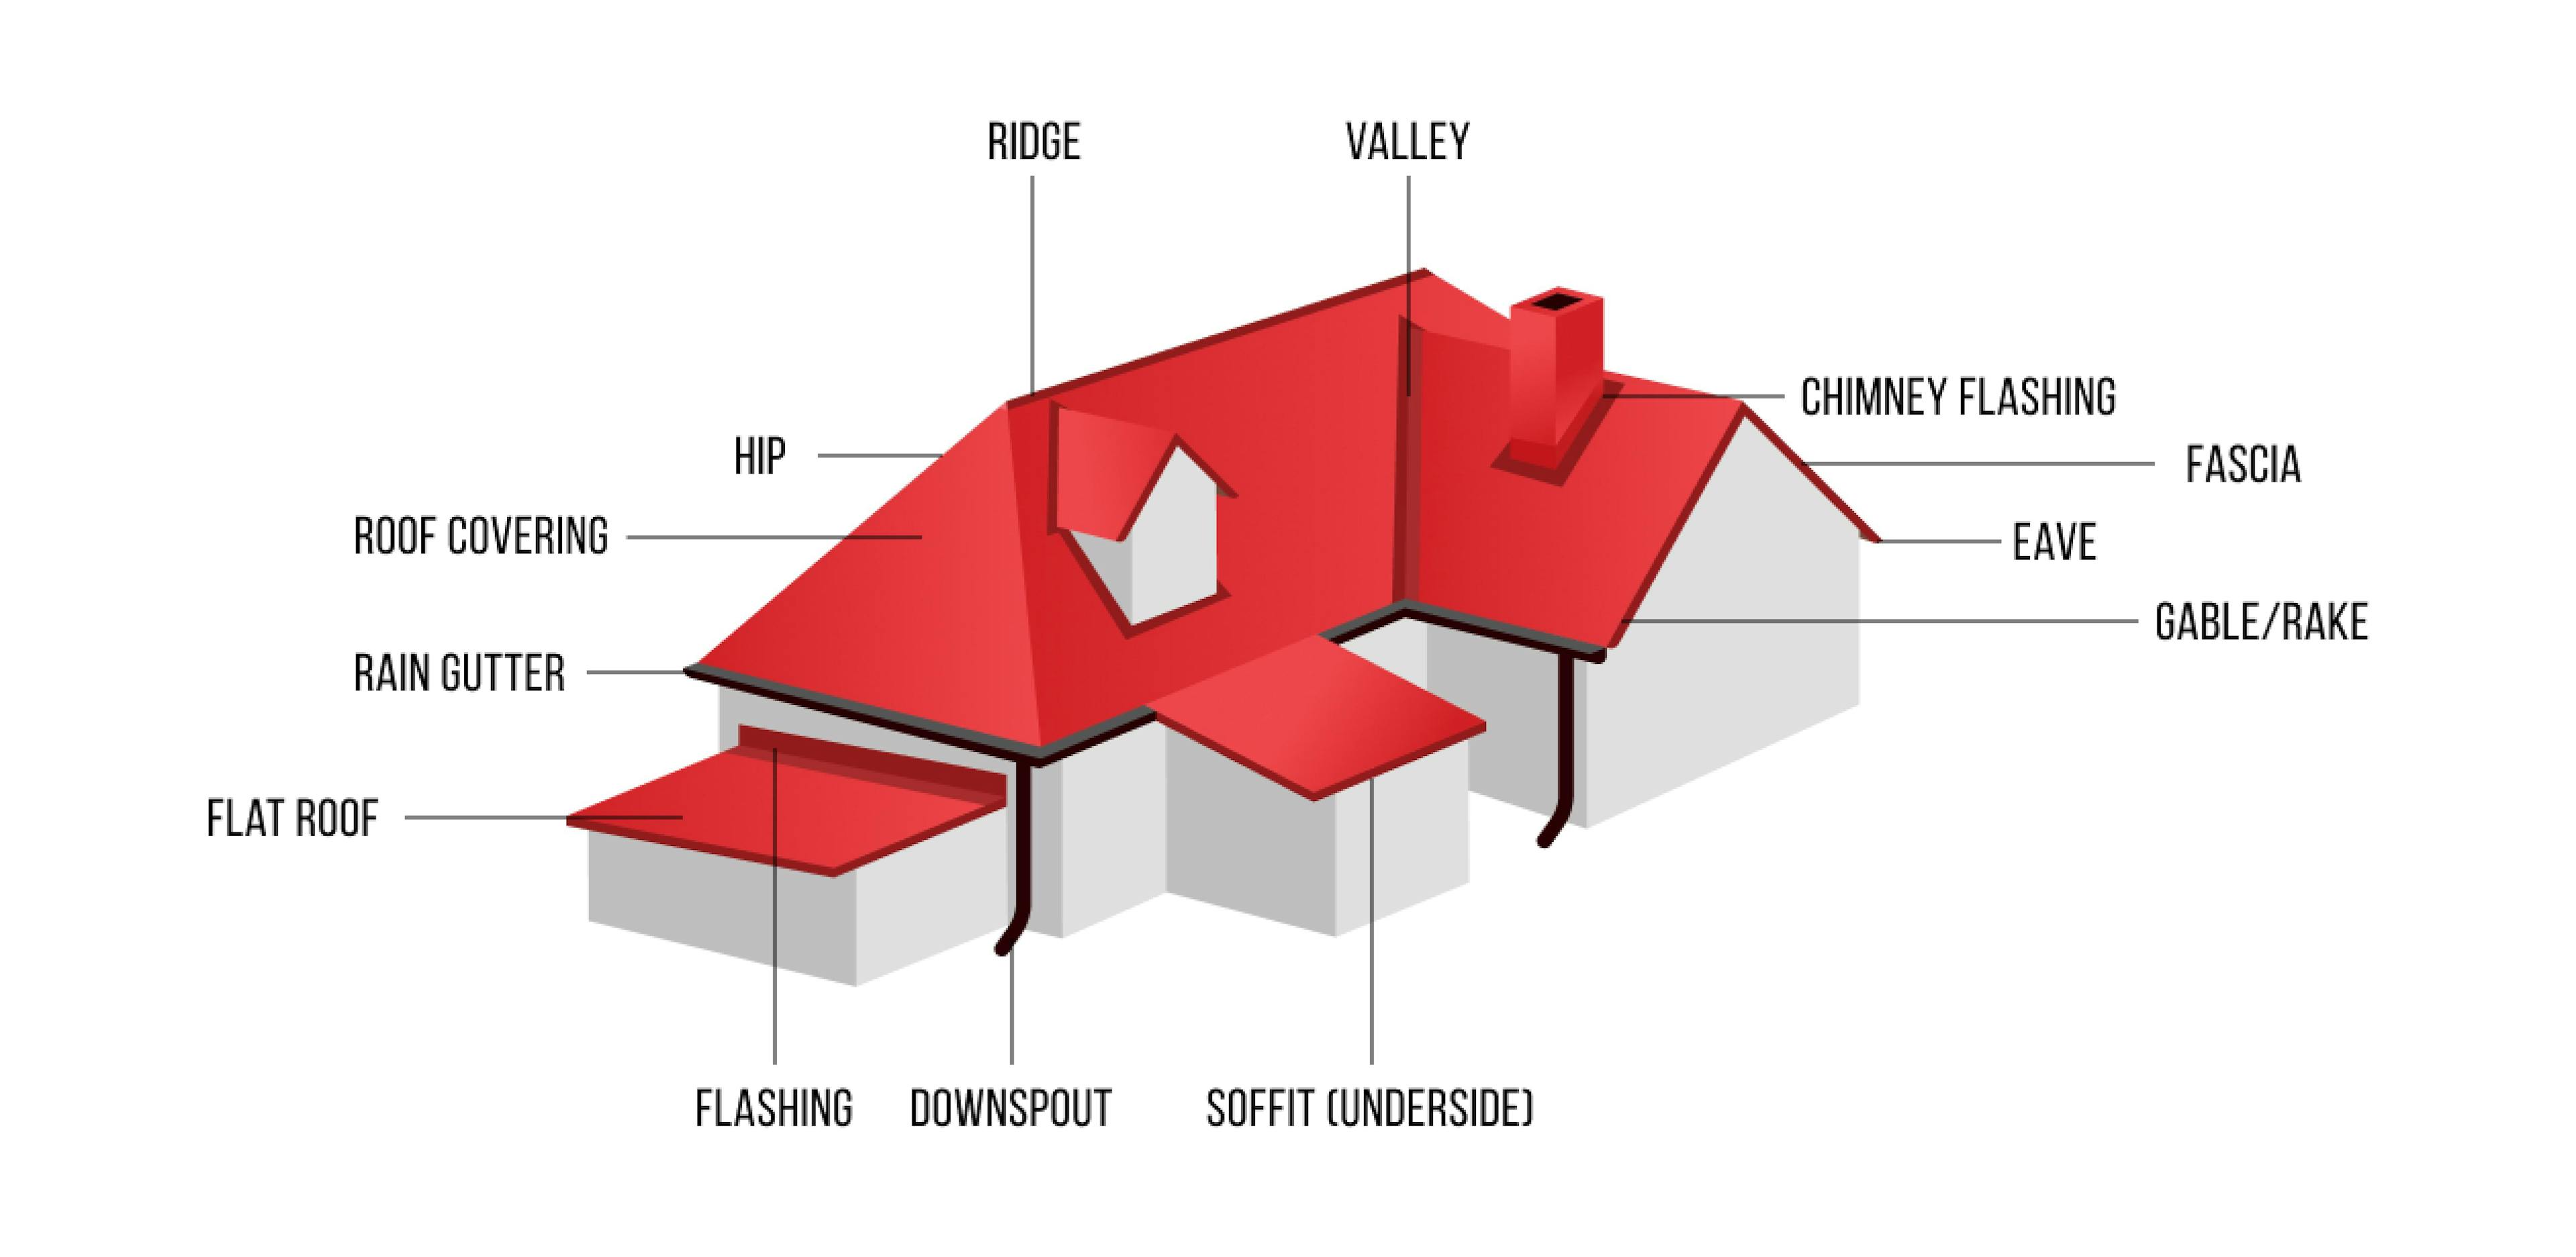 The Anatomy of A Roof Diagram | Roof Ridge | Roof Valley | Roof Hip | Roof Covering | Rain Gutter | Flat Roof | Roof Flashing | Gutter Downspout | Roof Soffit | Chimney Flashing | Roof Fascia | Roof Eave | Roof Gable | Roof Rake